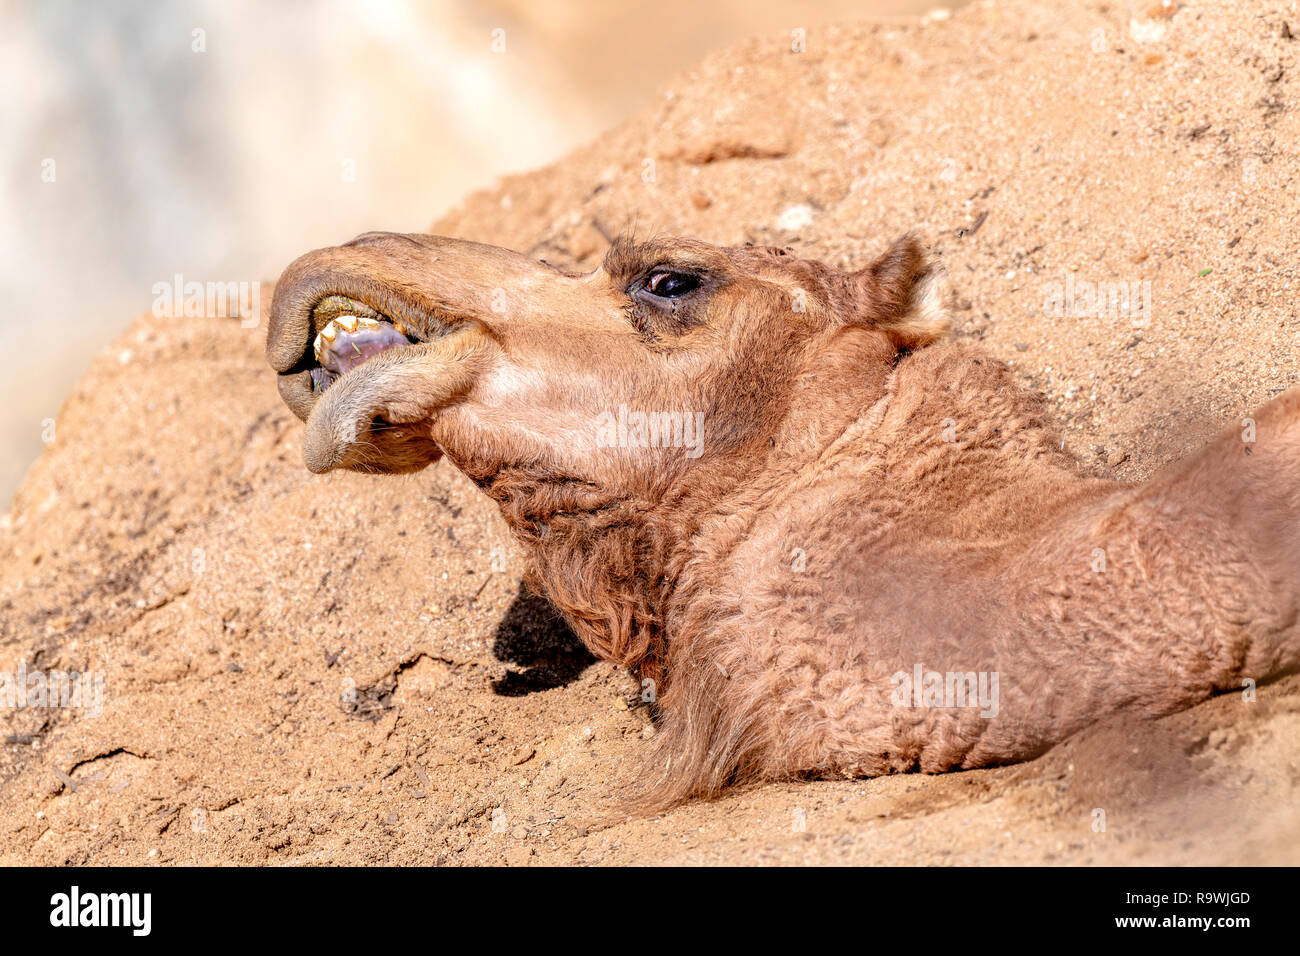 A camel lies in the dirt resting while making funny faces Stock Photo